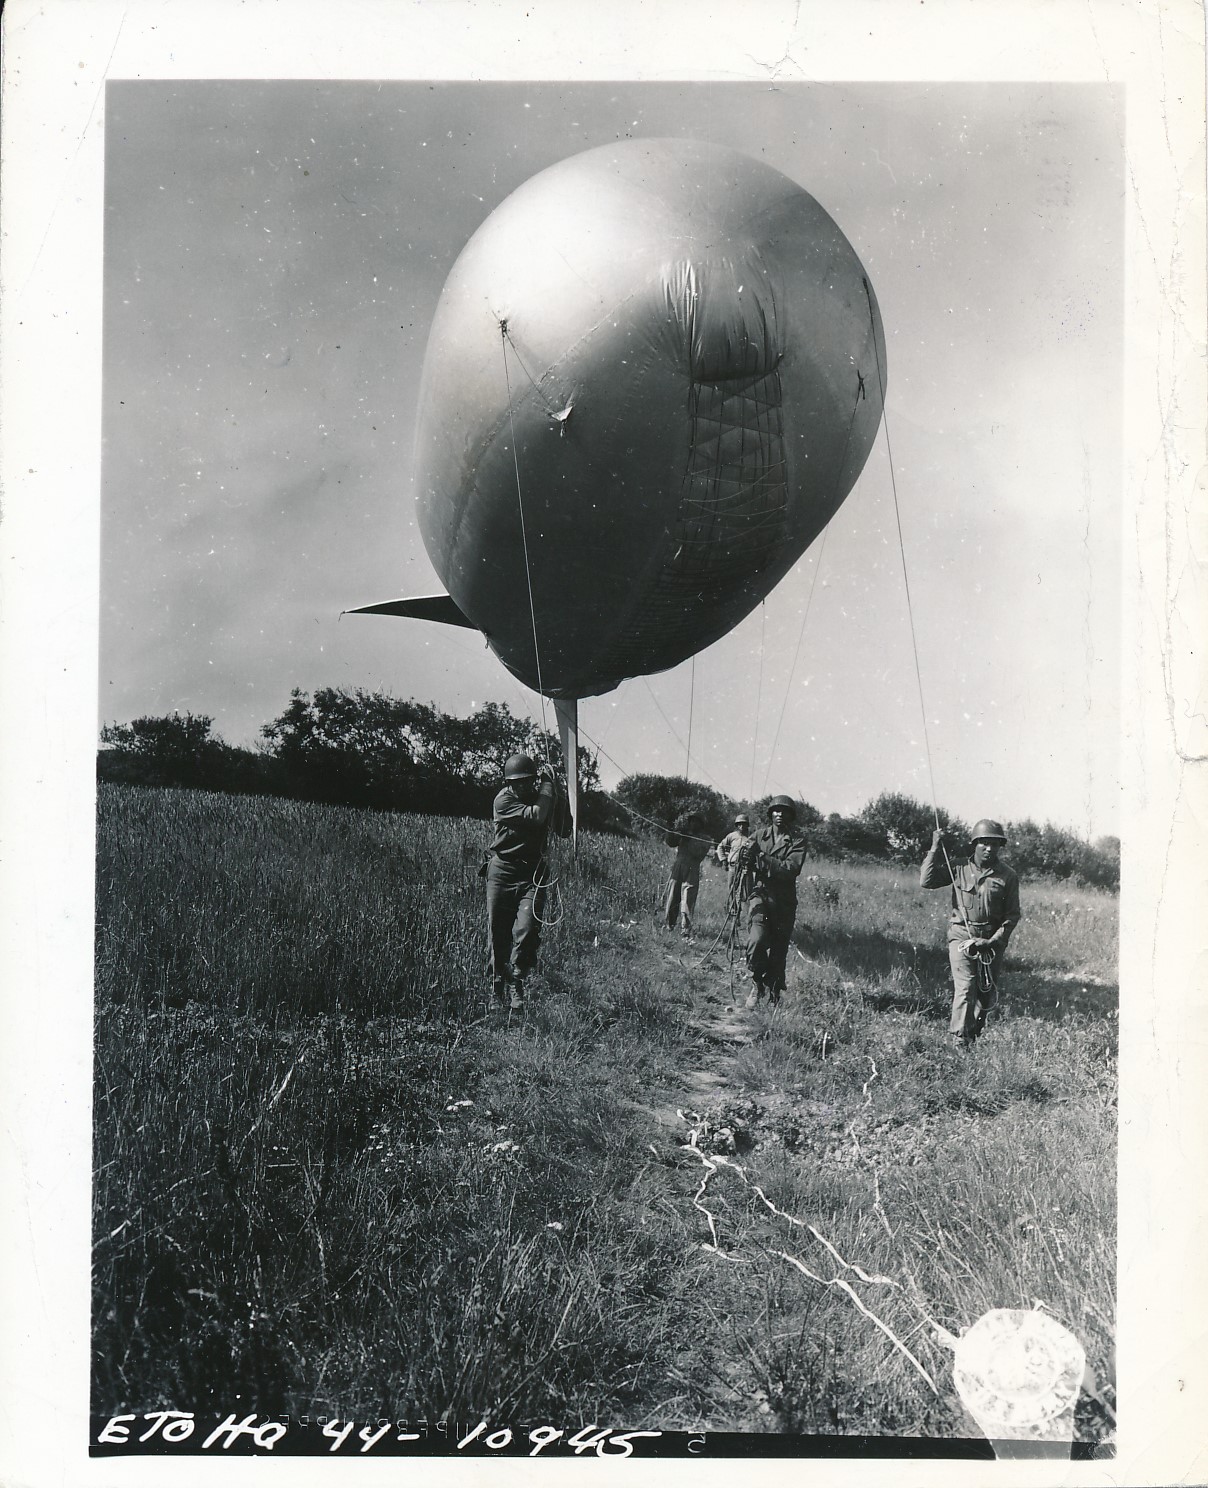 Barrage Balloons like these were used by Henry Parham and the members of the 320th Barrage Balloon Unit who were part of the Normandy Invasion.